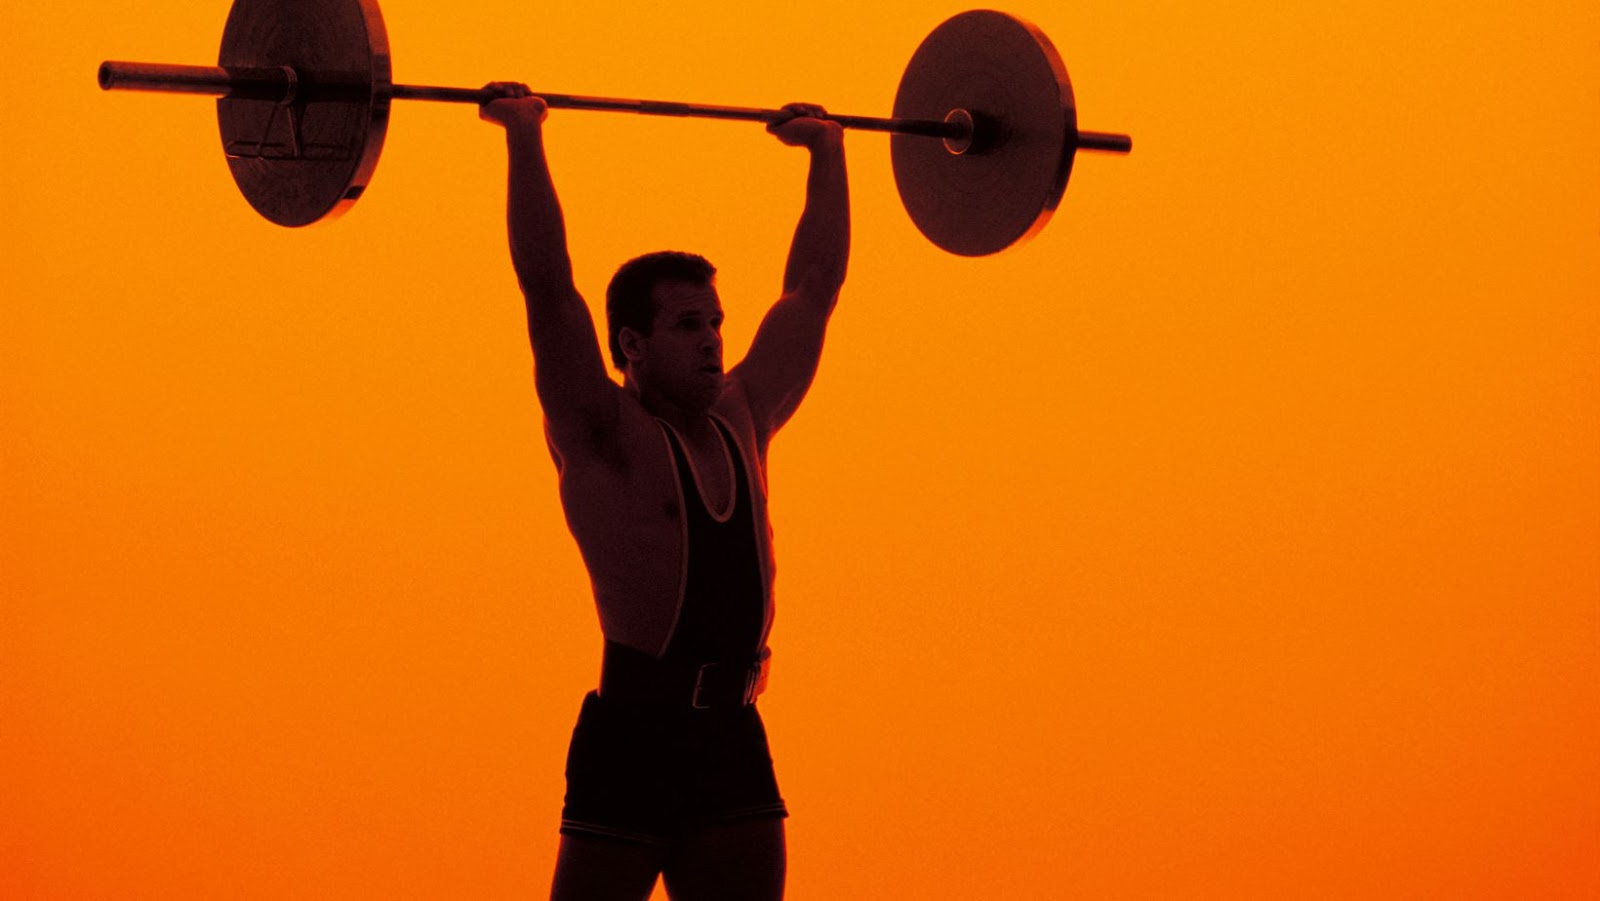 The History Of The Olympic Barbell